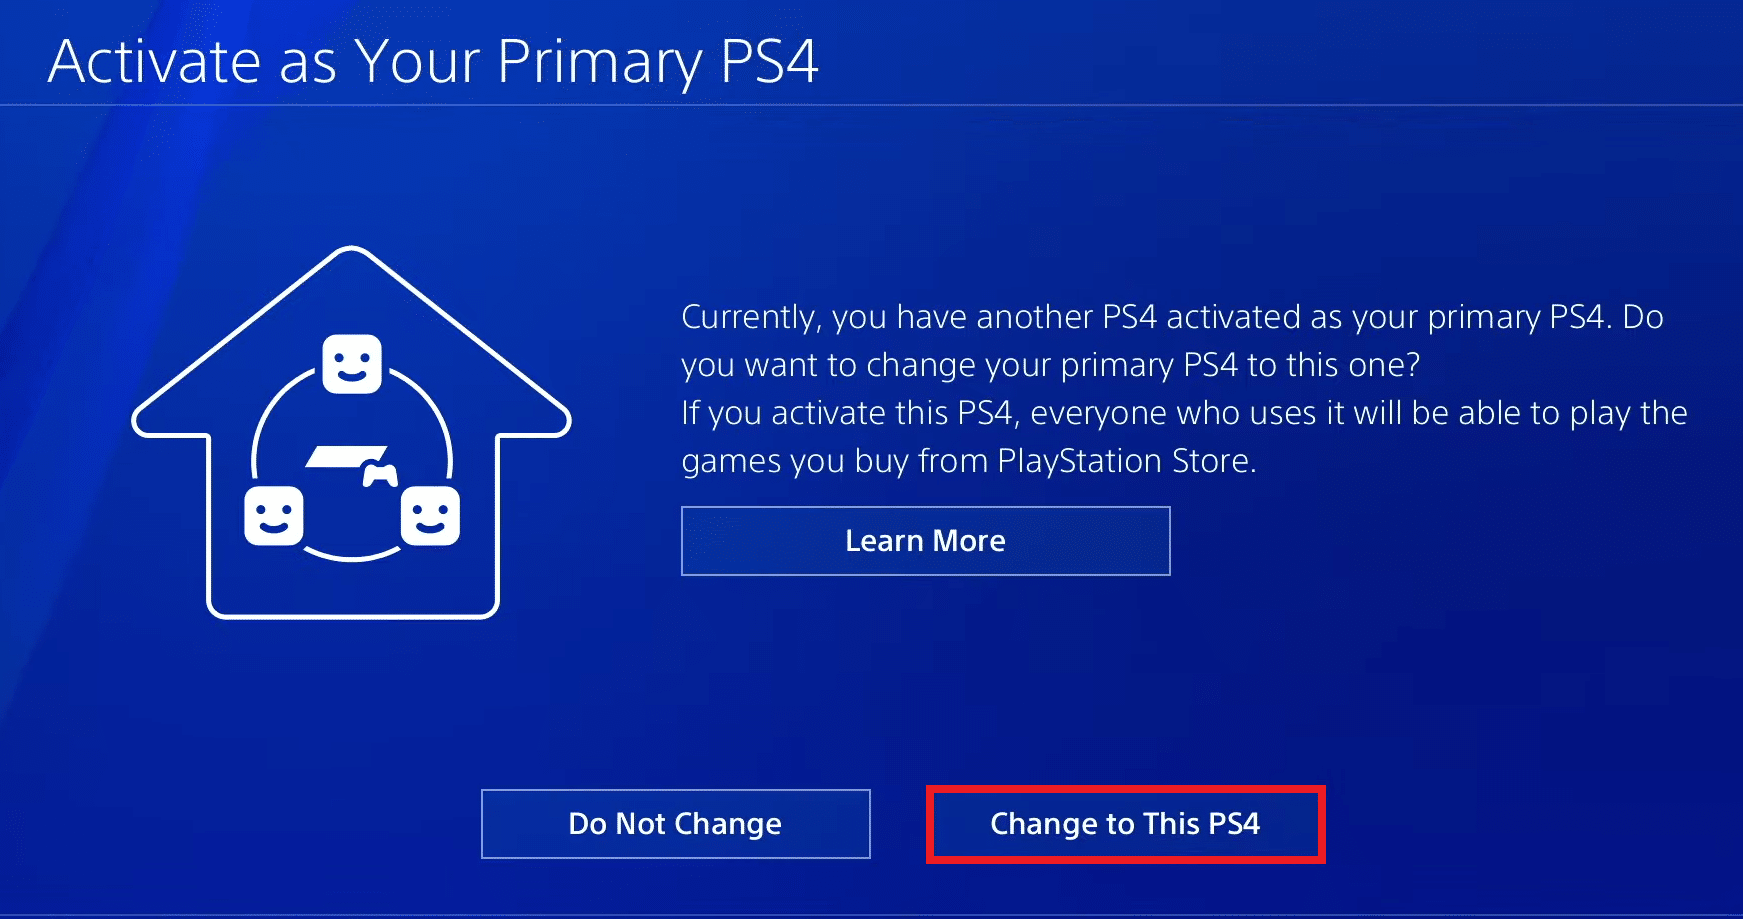 select the Change to This PS4 option to make this PS4 primary | How Can You Change Your Email on PS4